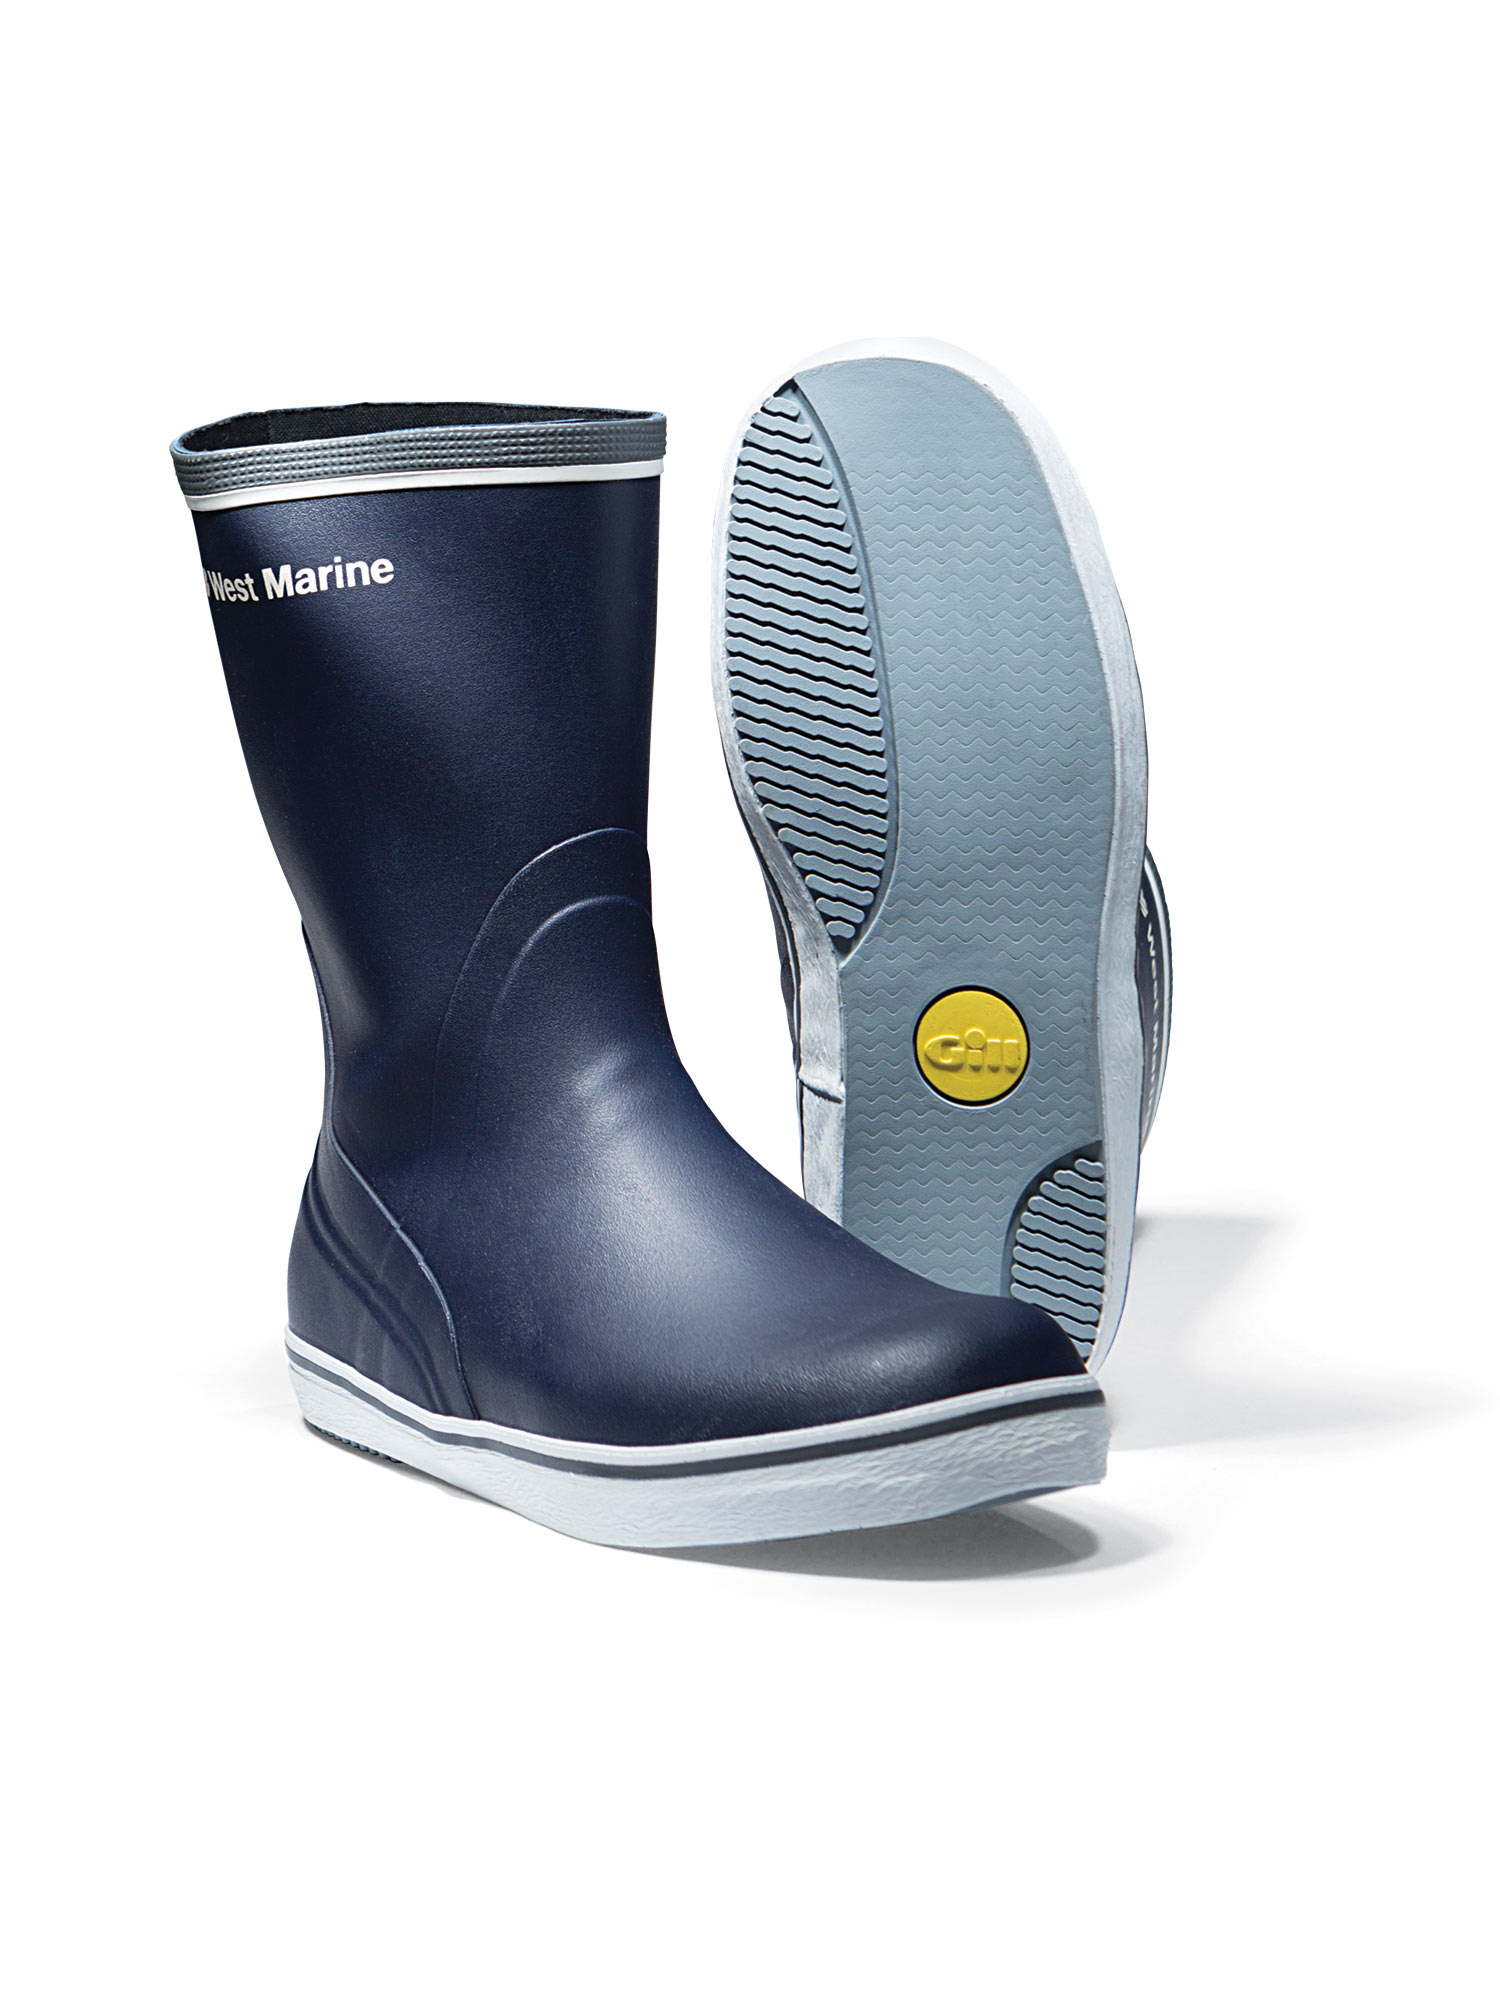 Fishing Boots for Bad Weather | Marlin 